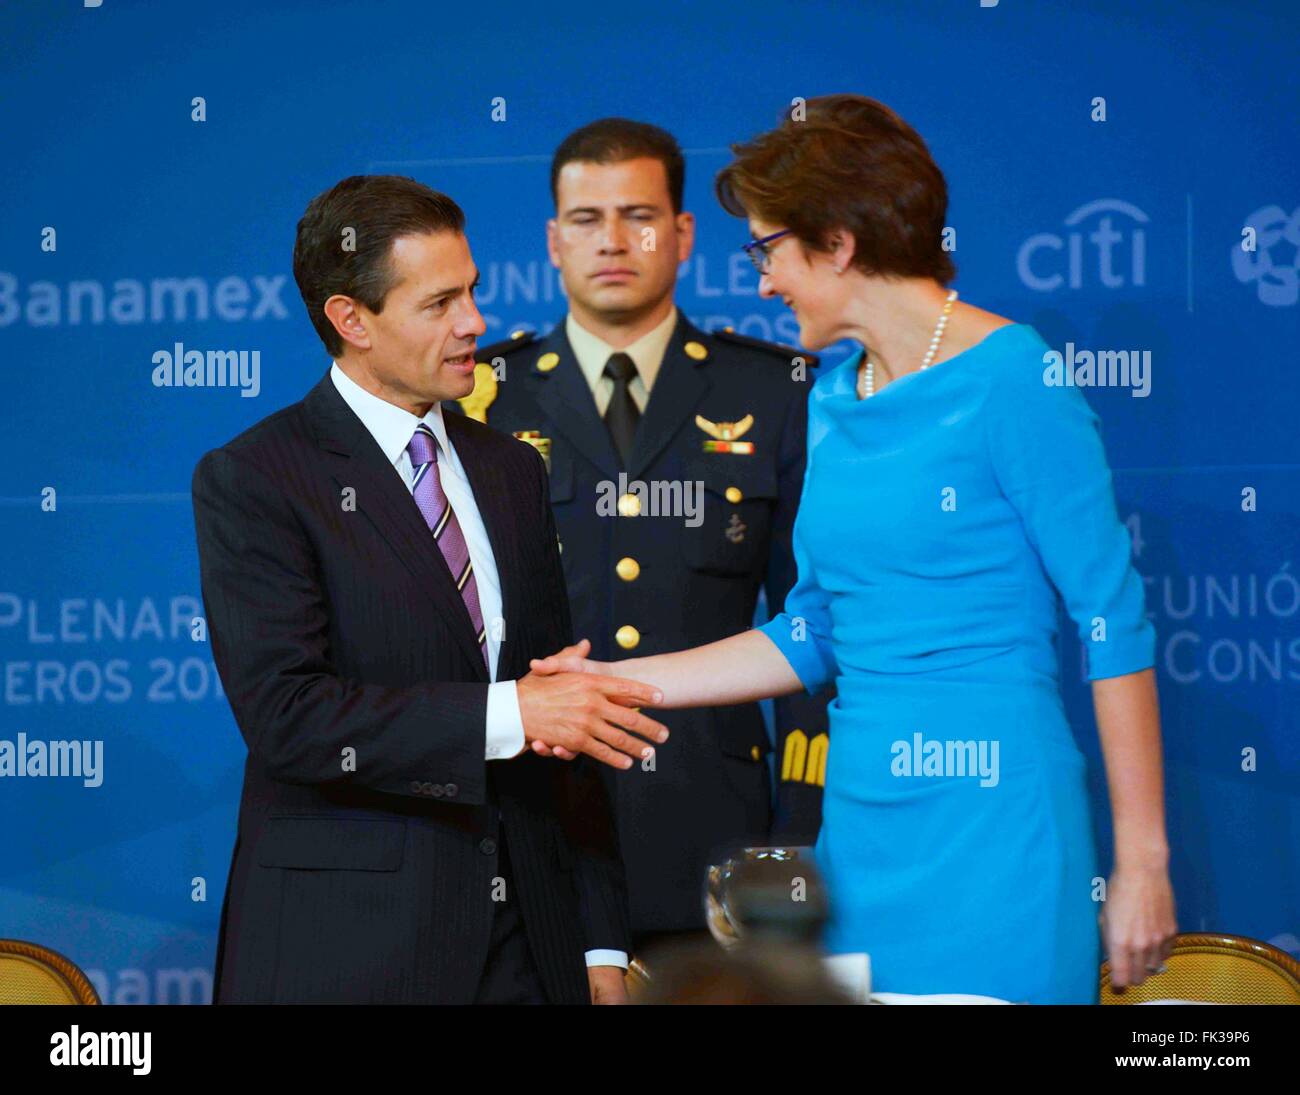 Mexican President Enrique Pena Nieto greets Jane Fraser, CEO of CITI Bank Latin America at the annual meeting of the Board of Directors of Banco Nacional de Mexico known as Banamex Bank at the Hyatt Hotel March 6, 2016 in Mexico City, Mexico. Banamex is owned by Citigroup. Stock Photo